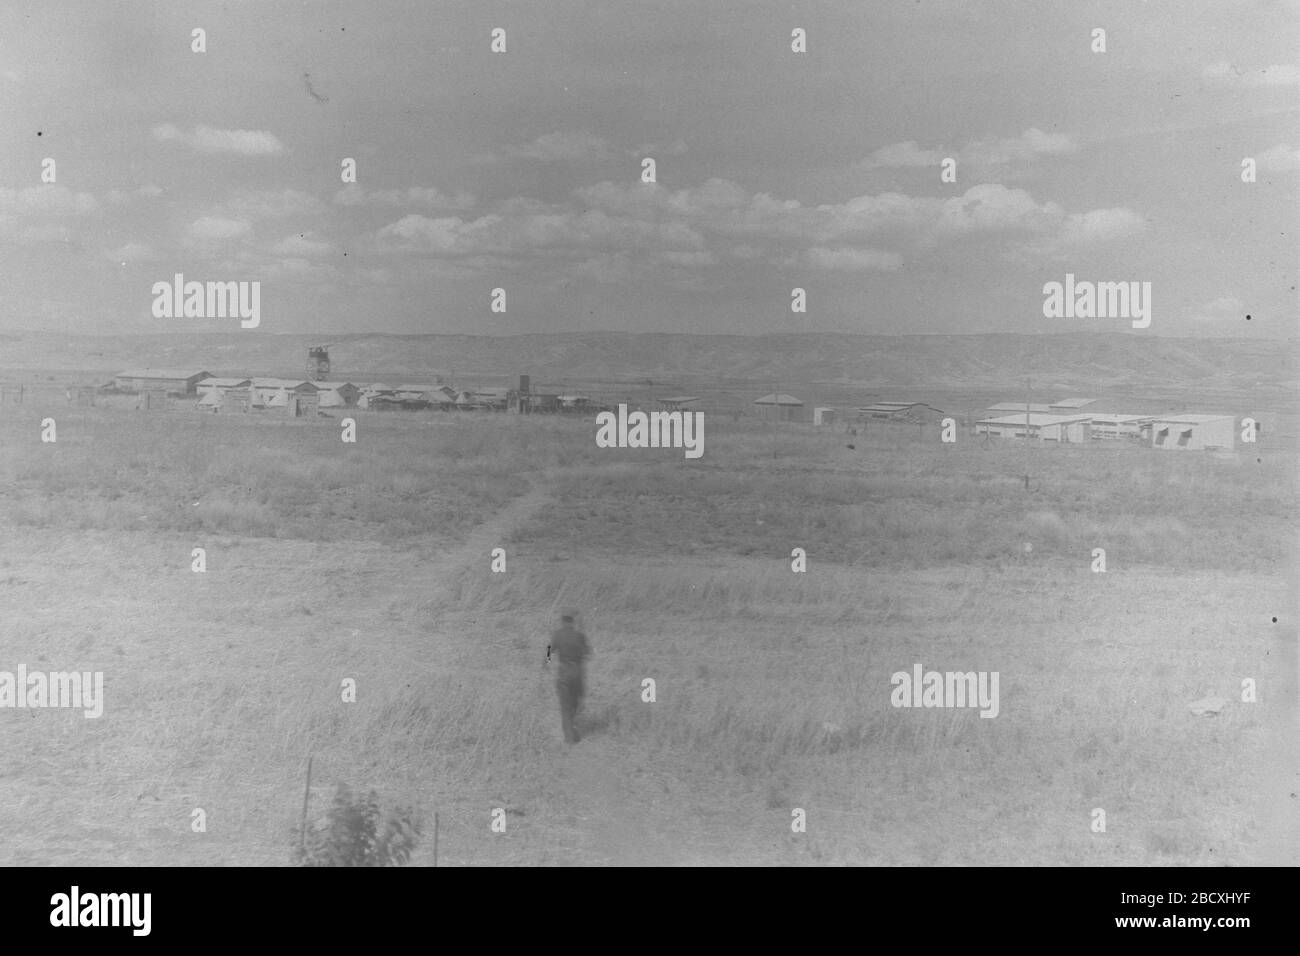 English A View Of Kibbutz Maoz Haim In The Beit Shean Valley U E I O U U O C U Ss O E I U I N O O O U E U Ss E O C E U 30 June 1939 This Is Available From National Photo Collection Of